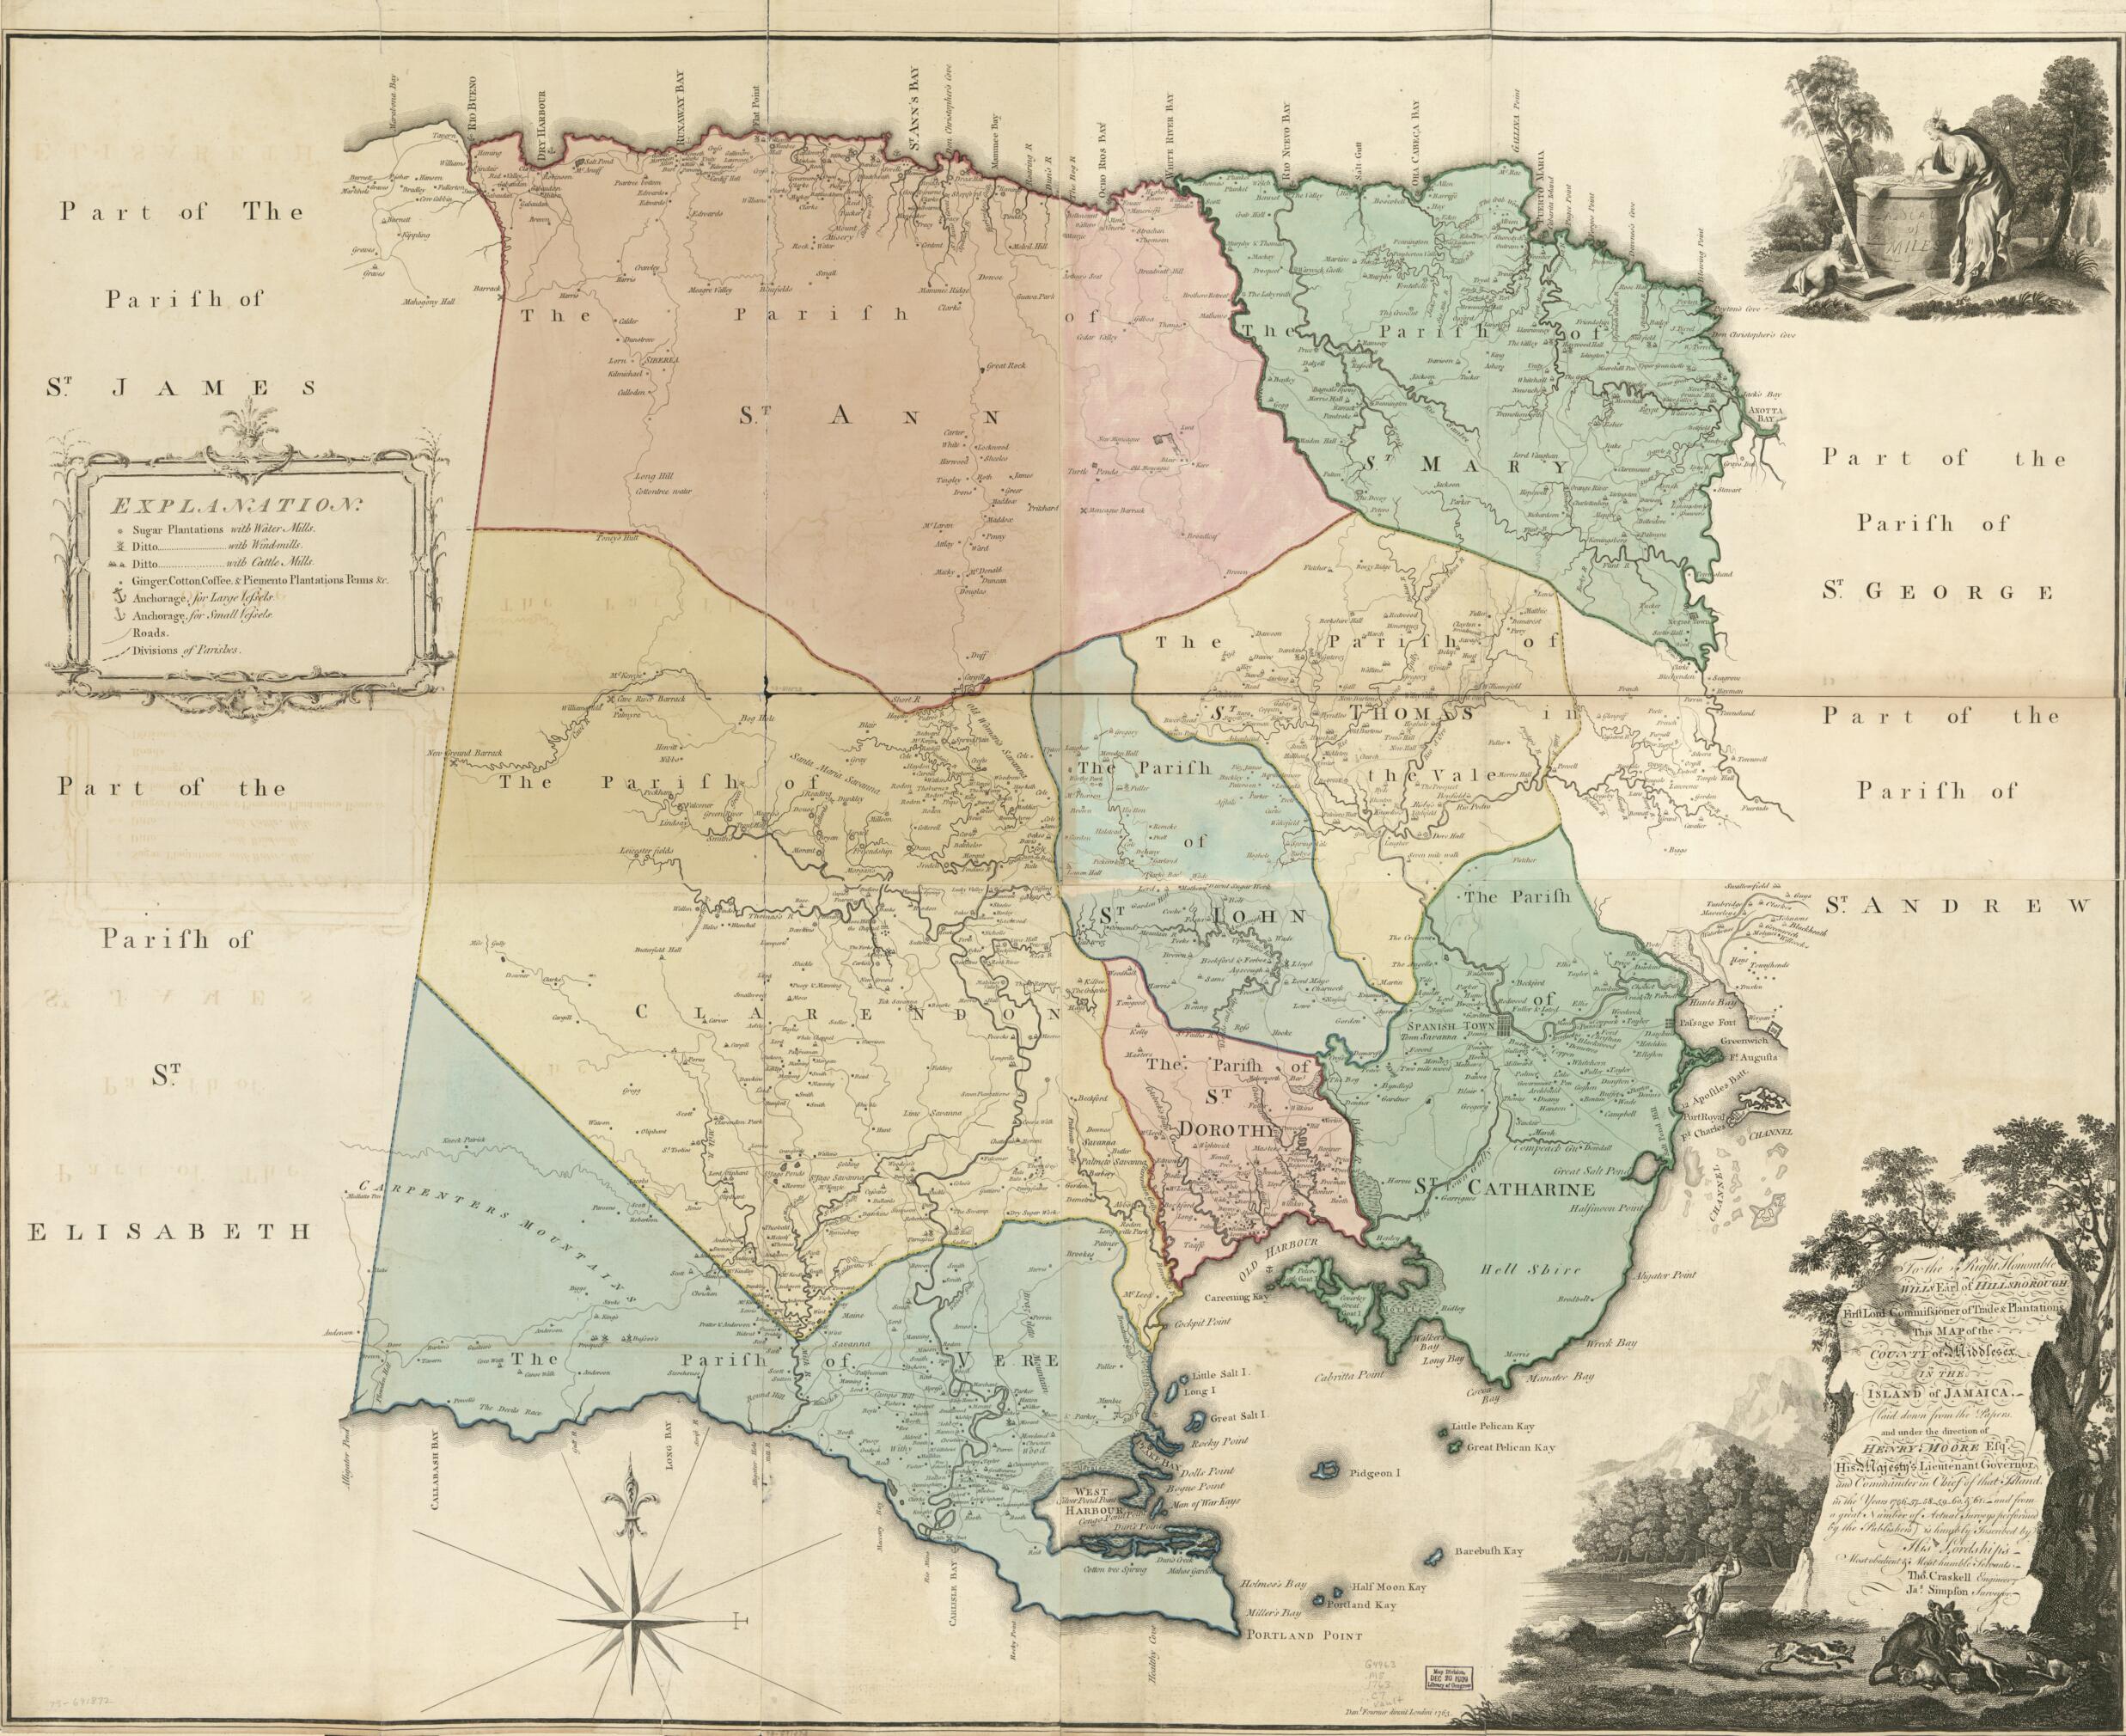 This old map of This Map of the County of Middlesex In the Island of Jamaica from 1763 was created by Thomas Craskell, Daniel Fournier, Henry Moore, James Simpson in 1763